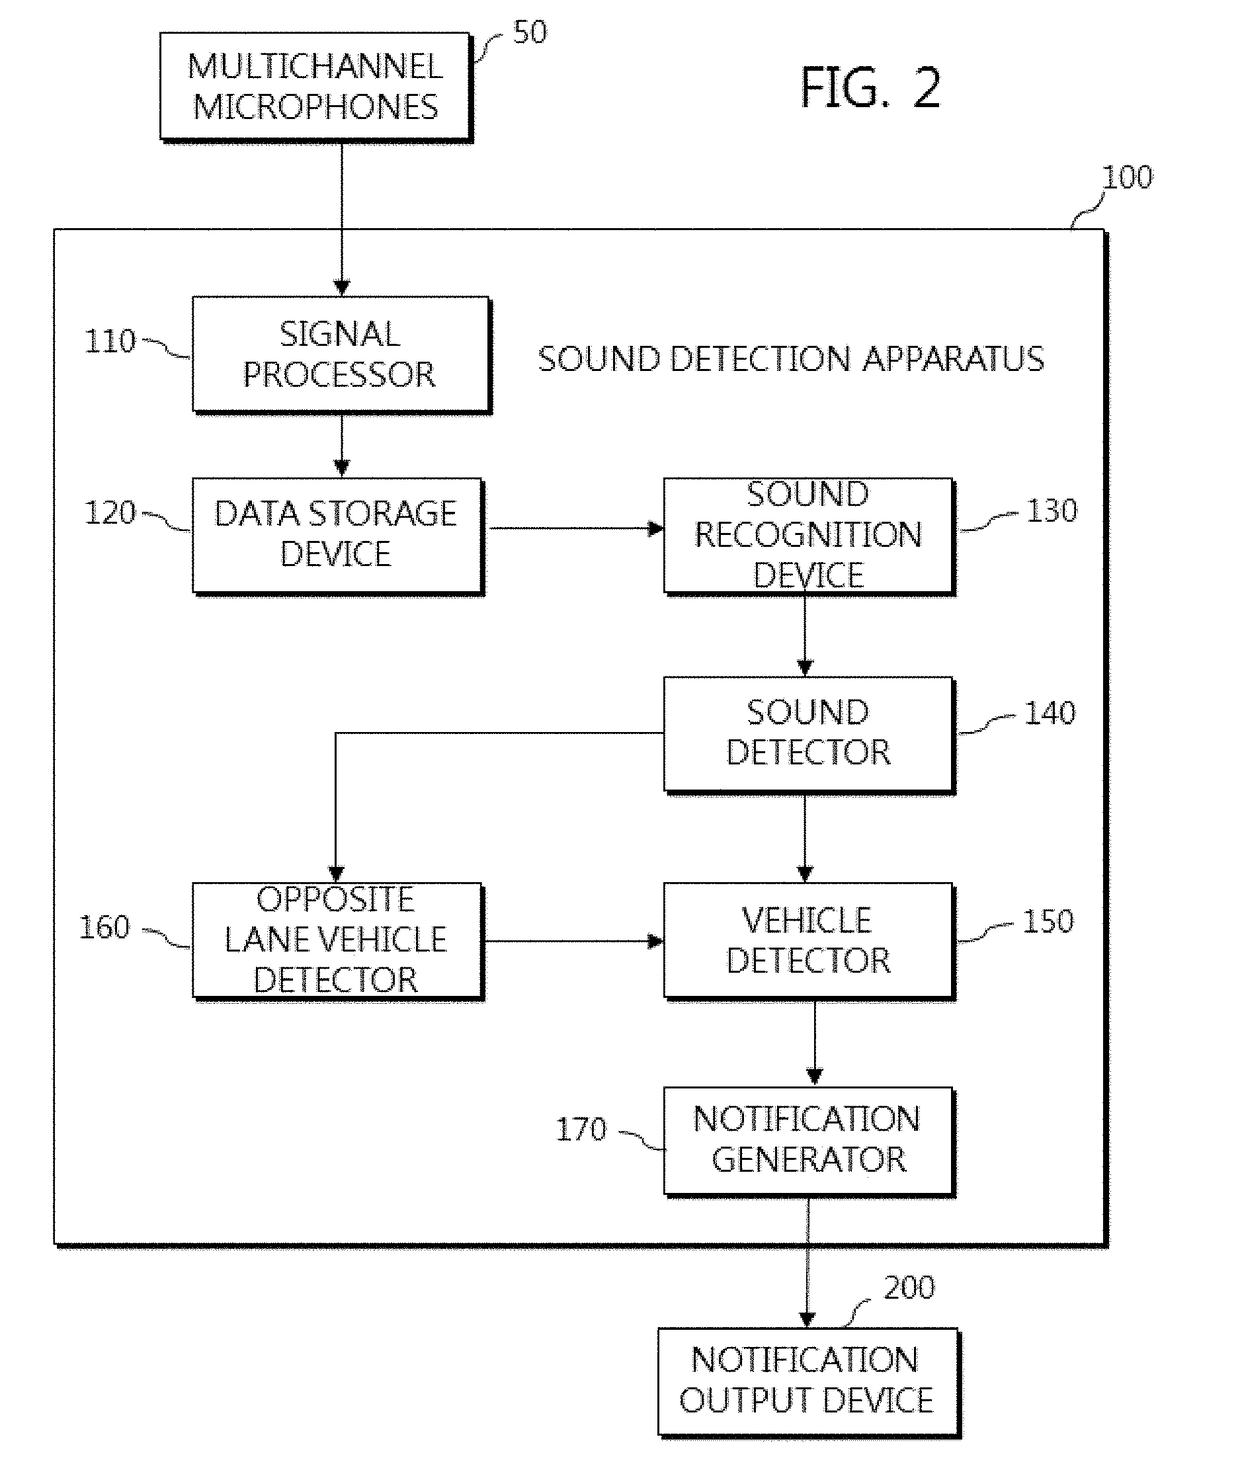 Method for providing sound detection information, apparatus detecting sound around vehicle, and vehicle including the same